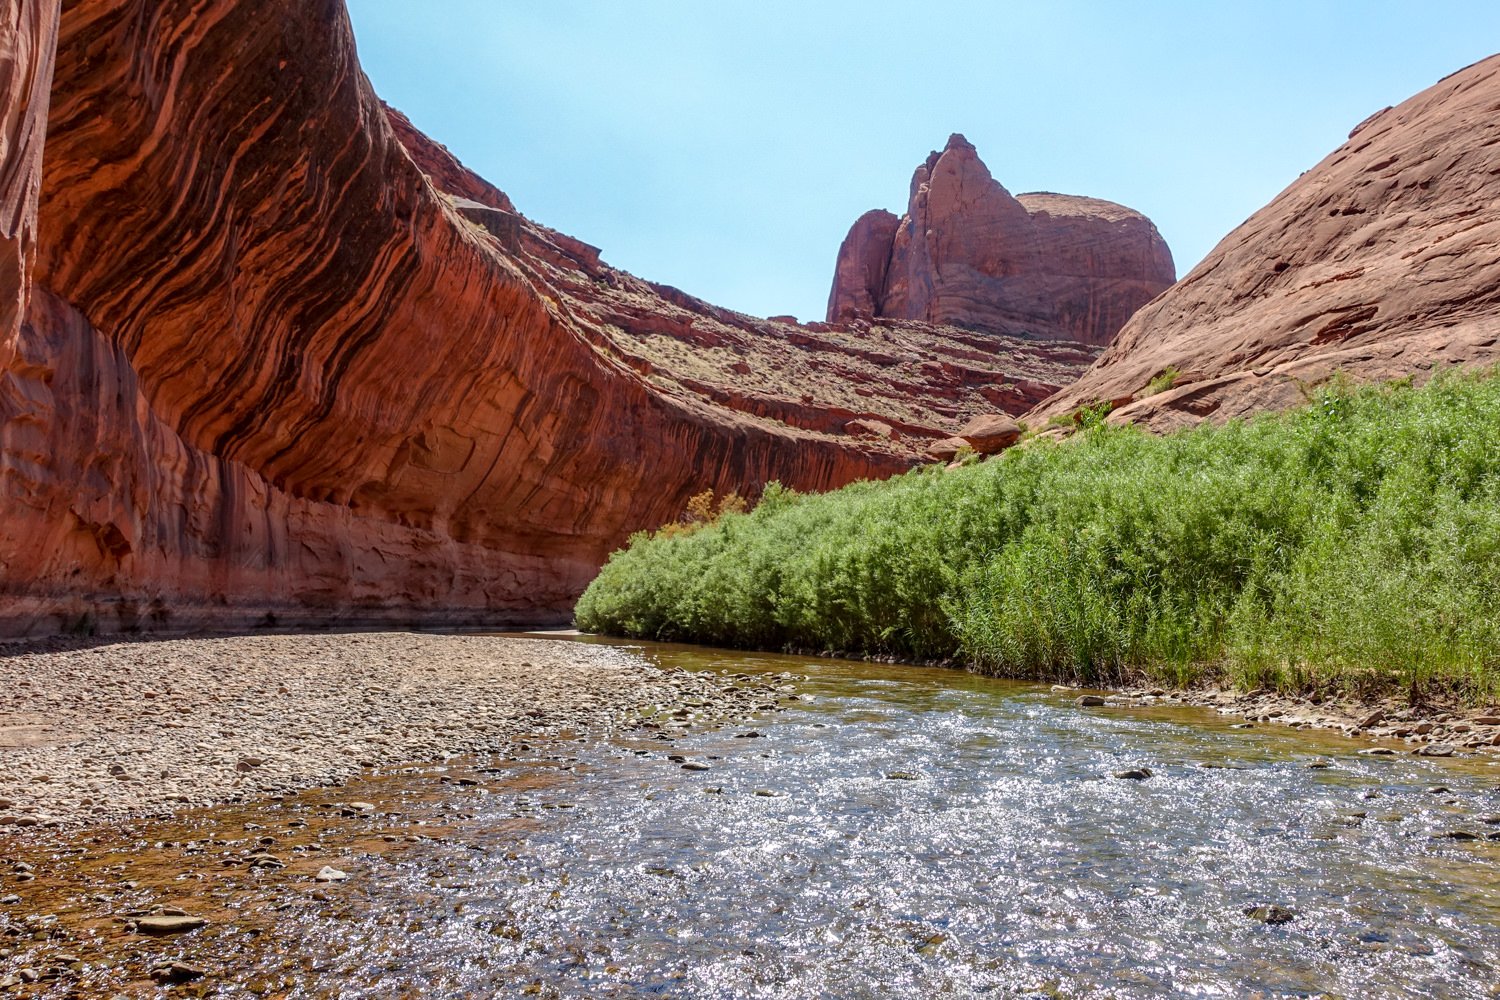 A creek running through a red rock canyon in Coyote Gulch